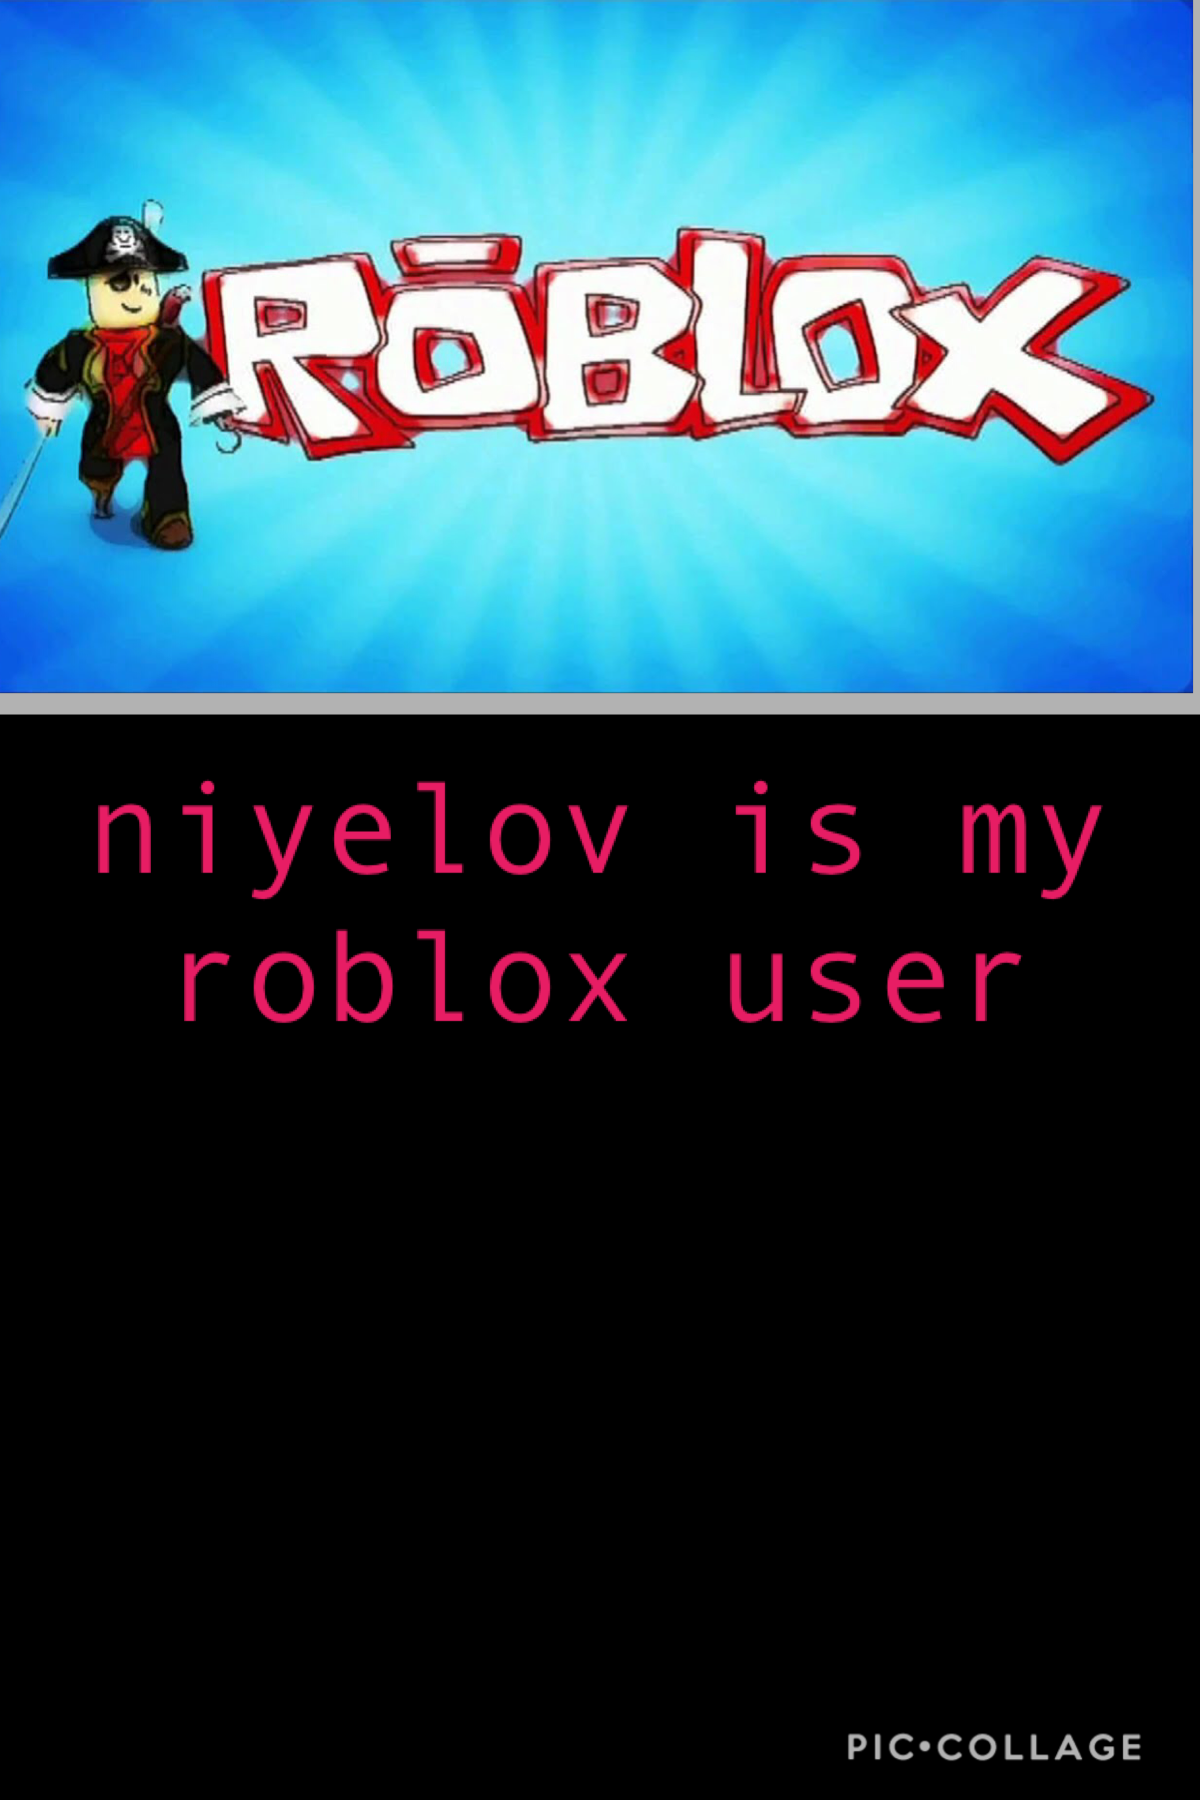 Do you want to be my roblox friend?